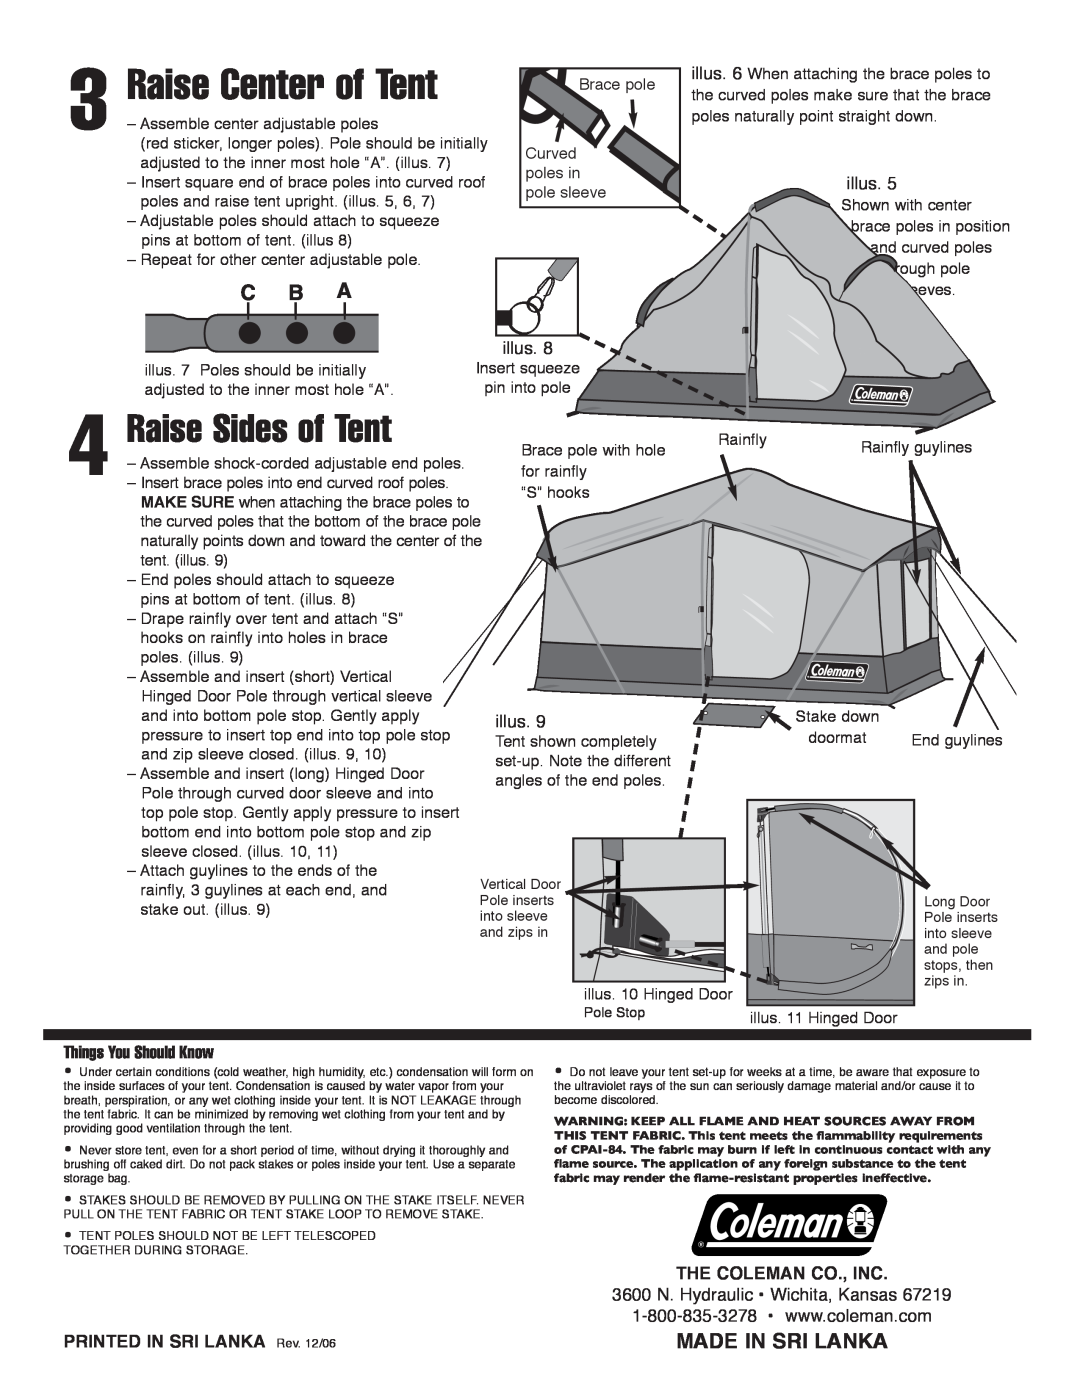 Coleman 923D129 manual Raise Sides of Tent, Made In Sri Lanka, Raise Center of Tent, illus, Things You Should Know 